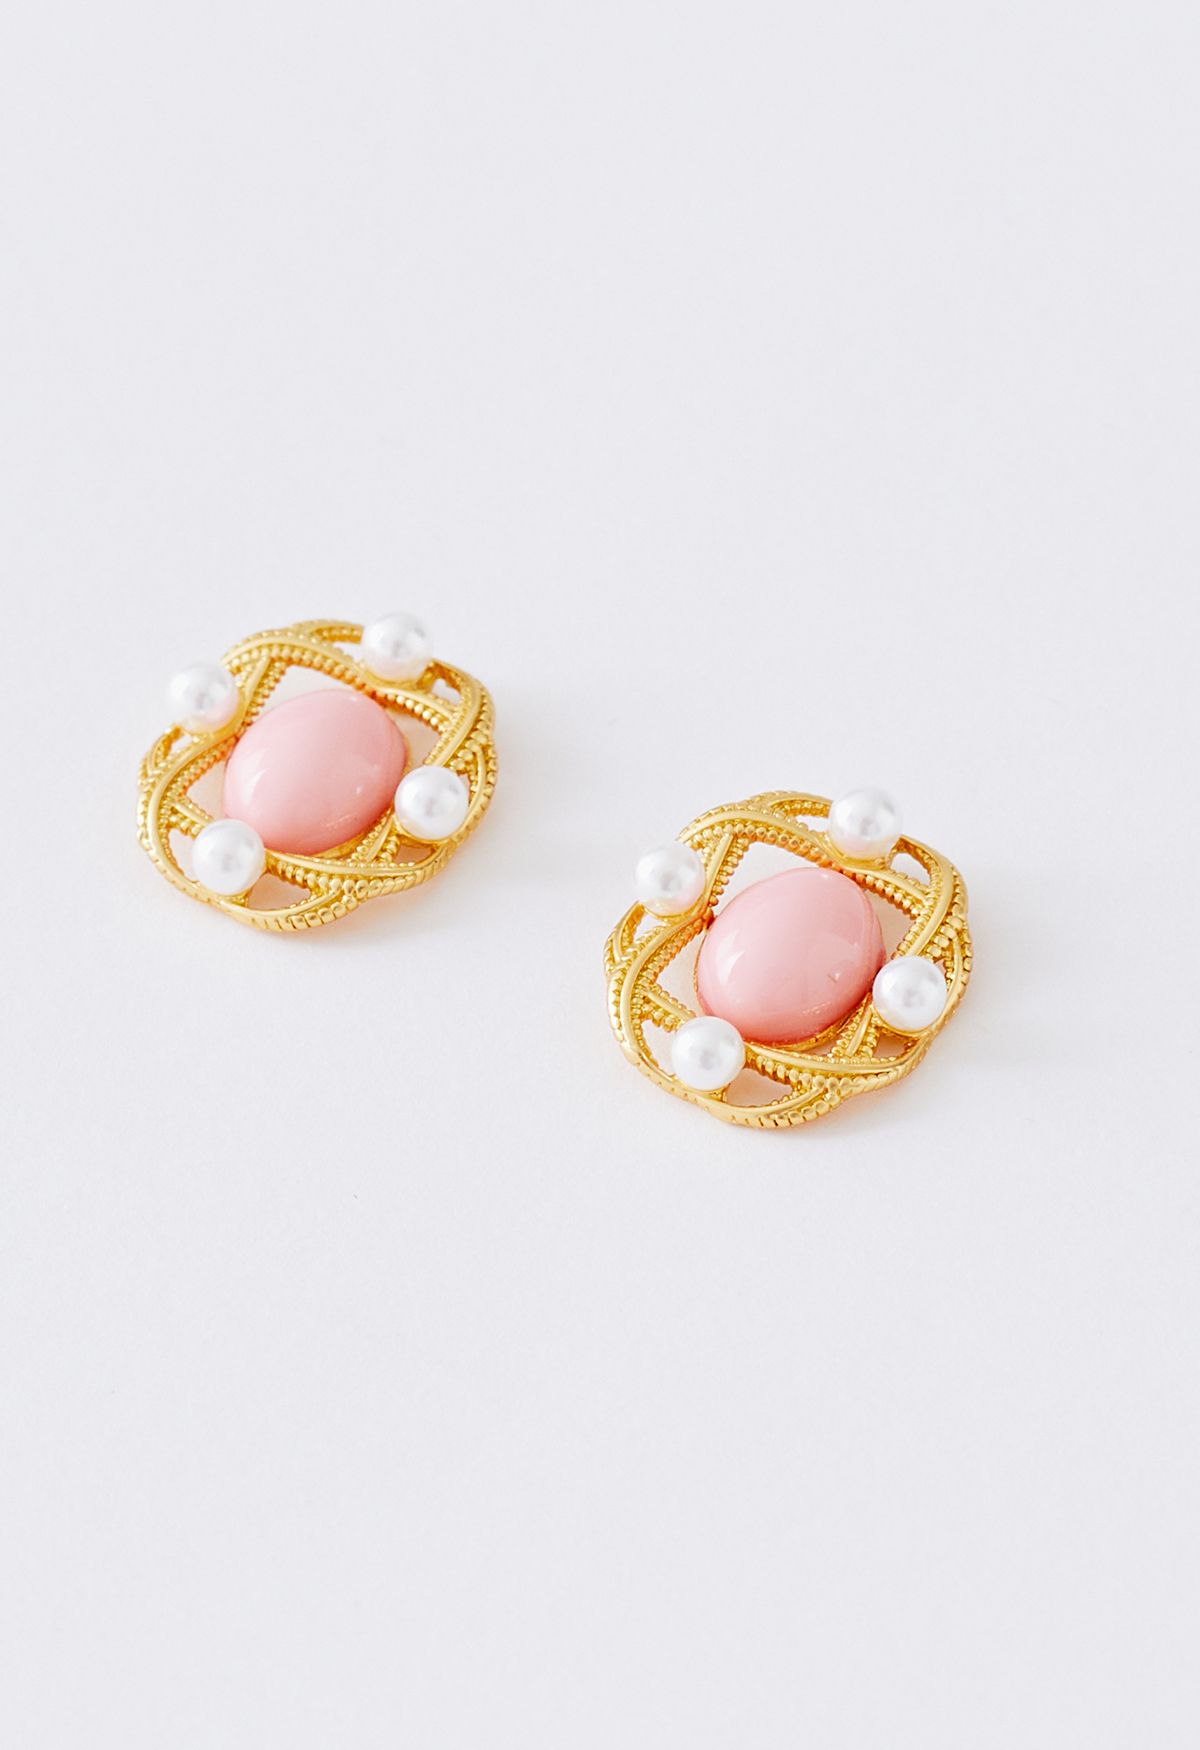 Hollow Out Intertwine Metal Pearl Earrings in Pink